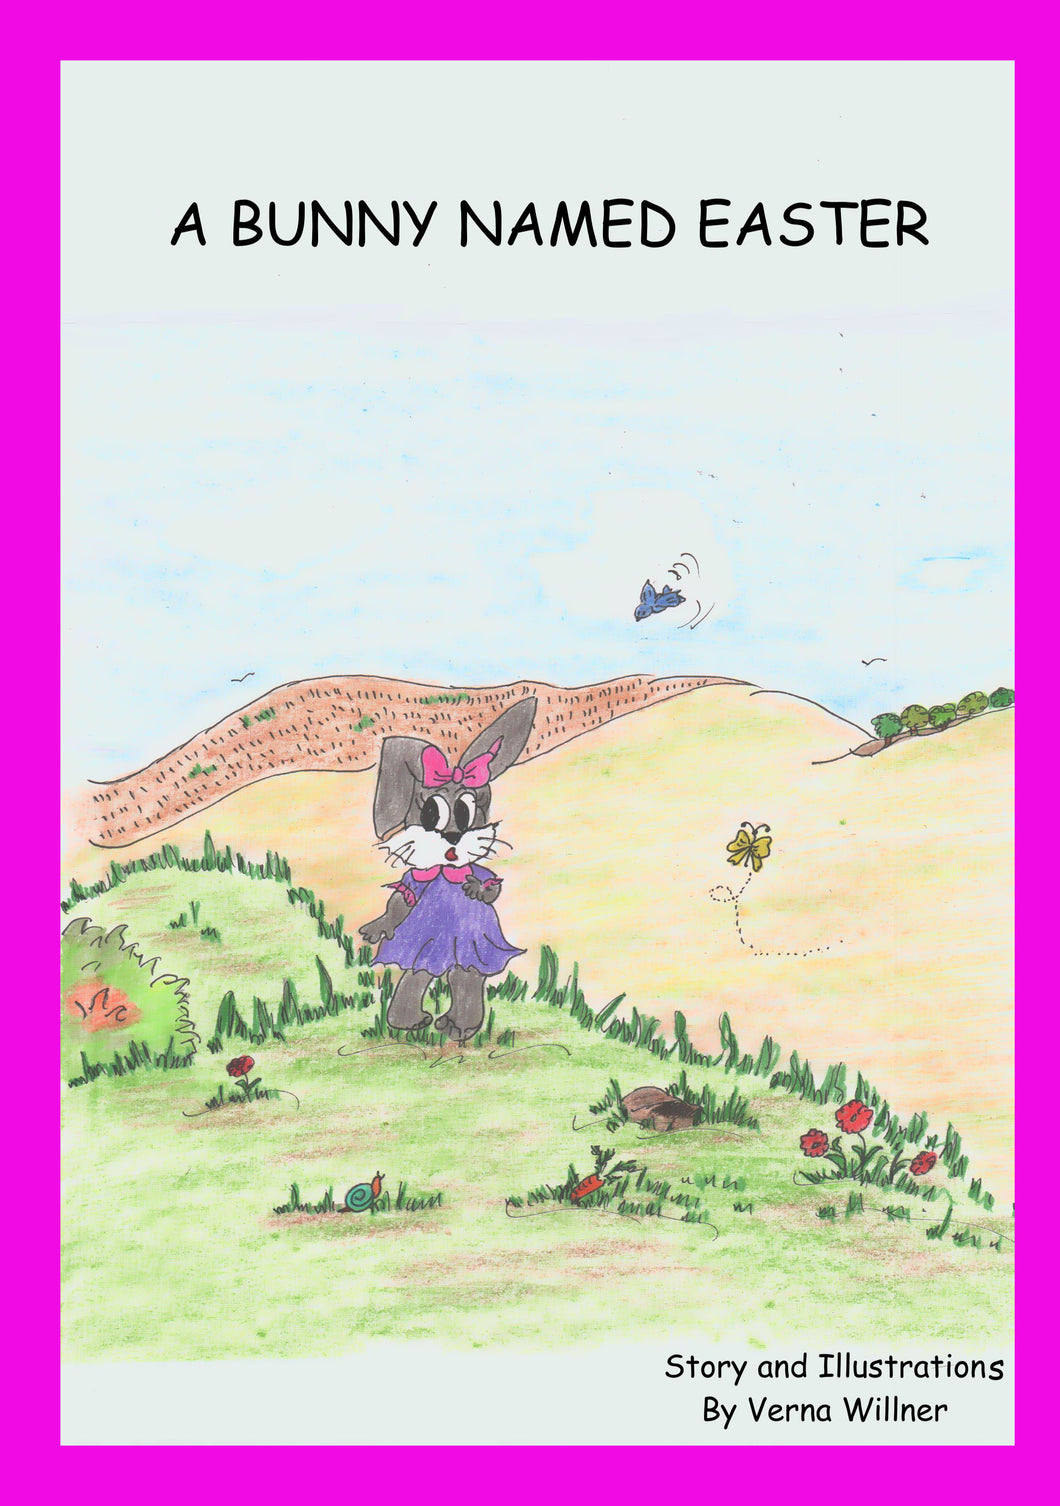 A Bunny Named Easter